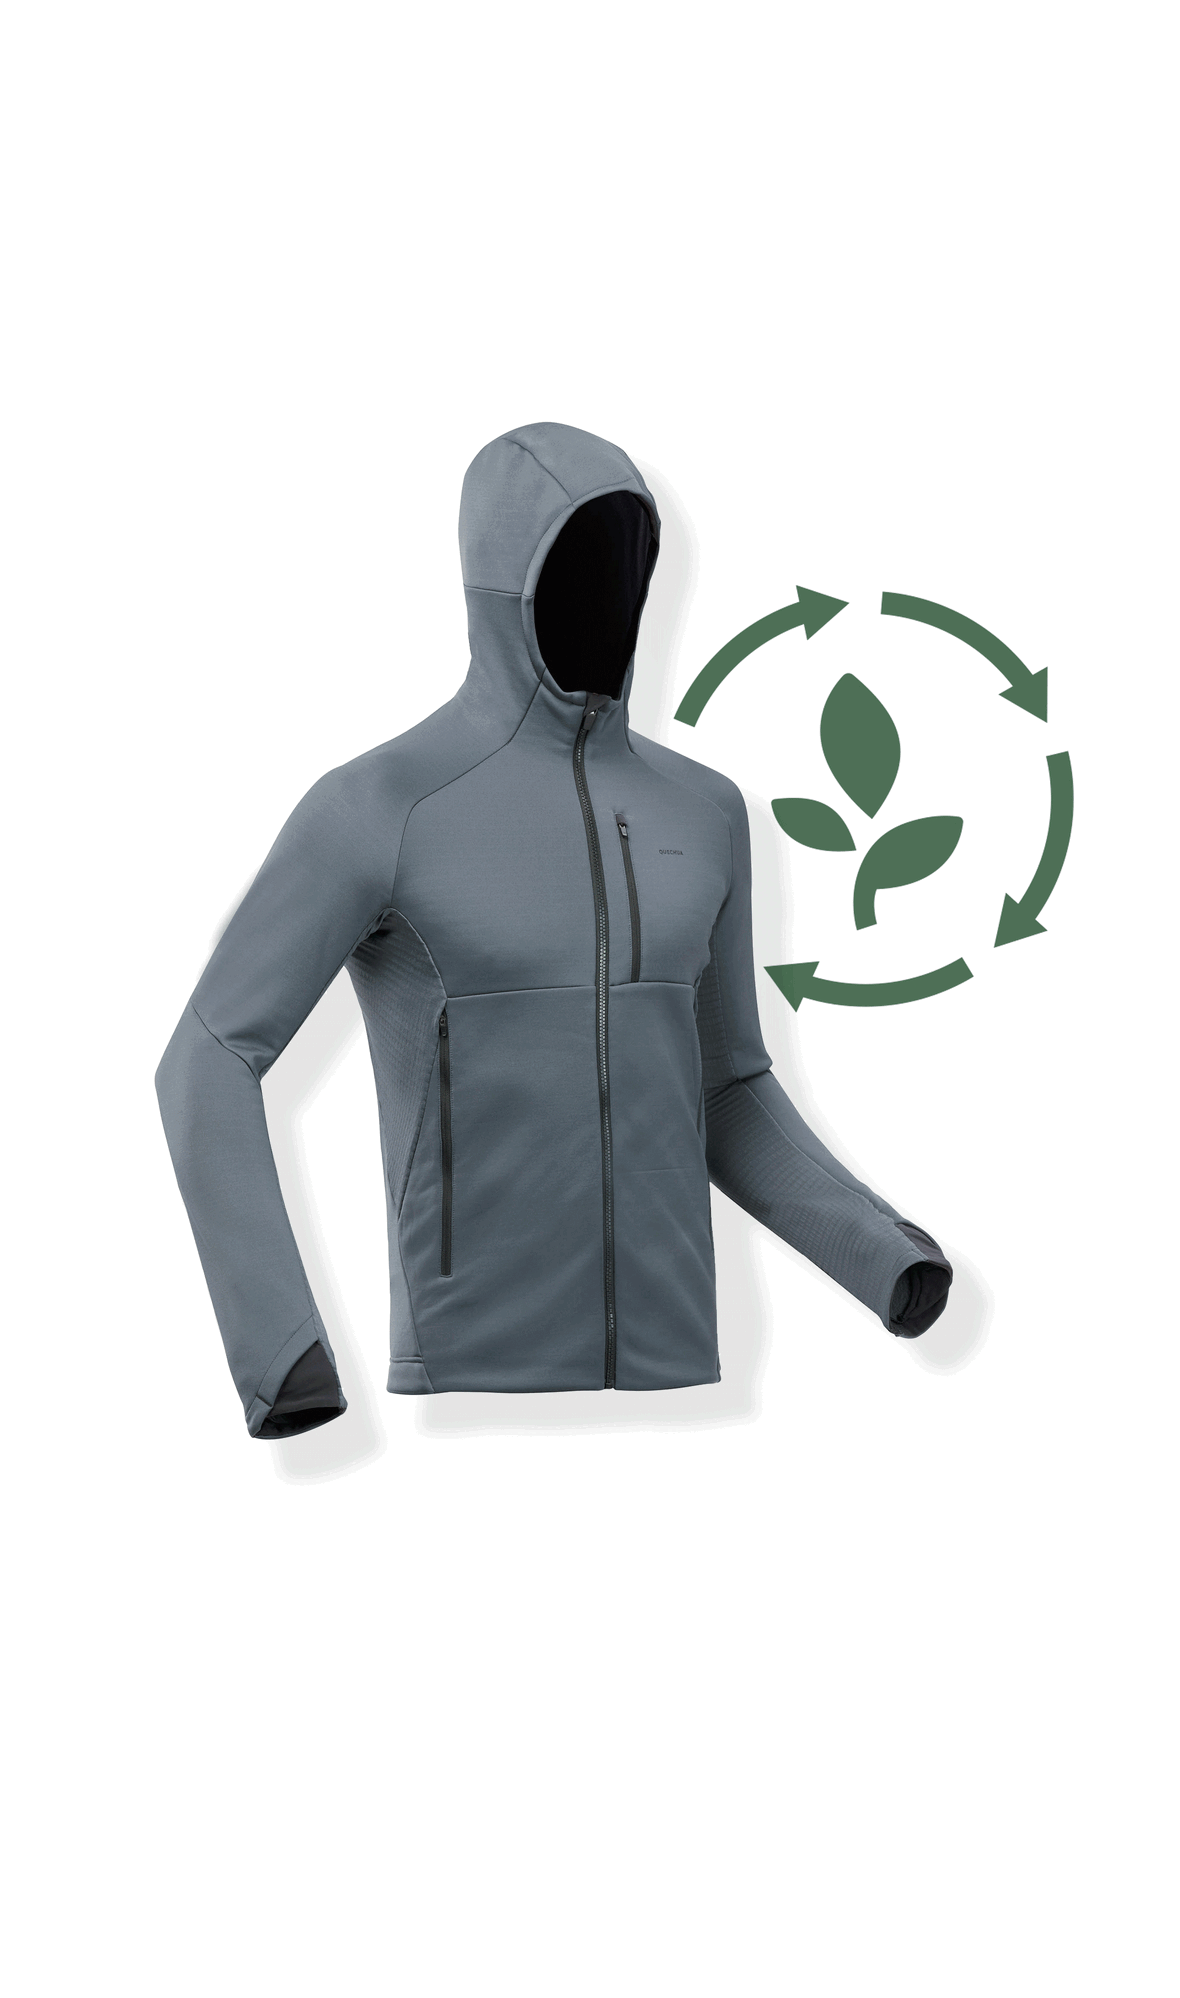 How to choose your hiking fleece? 